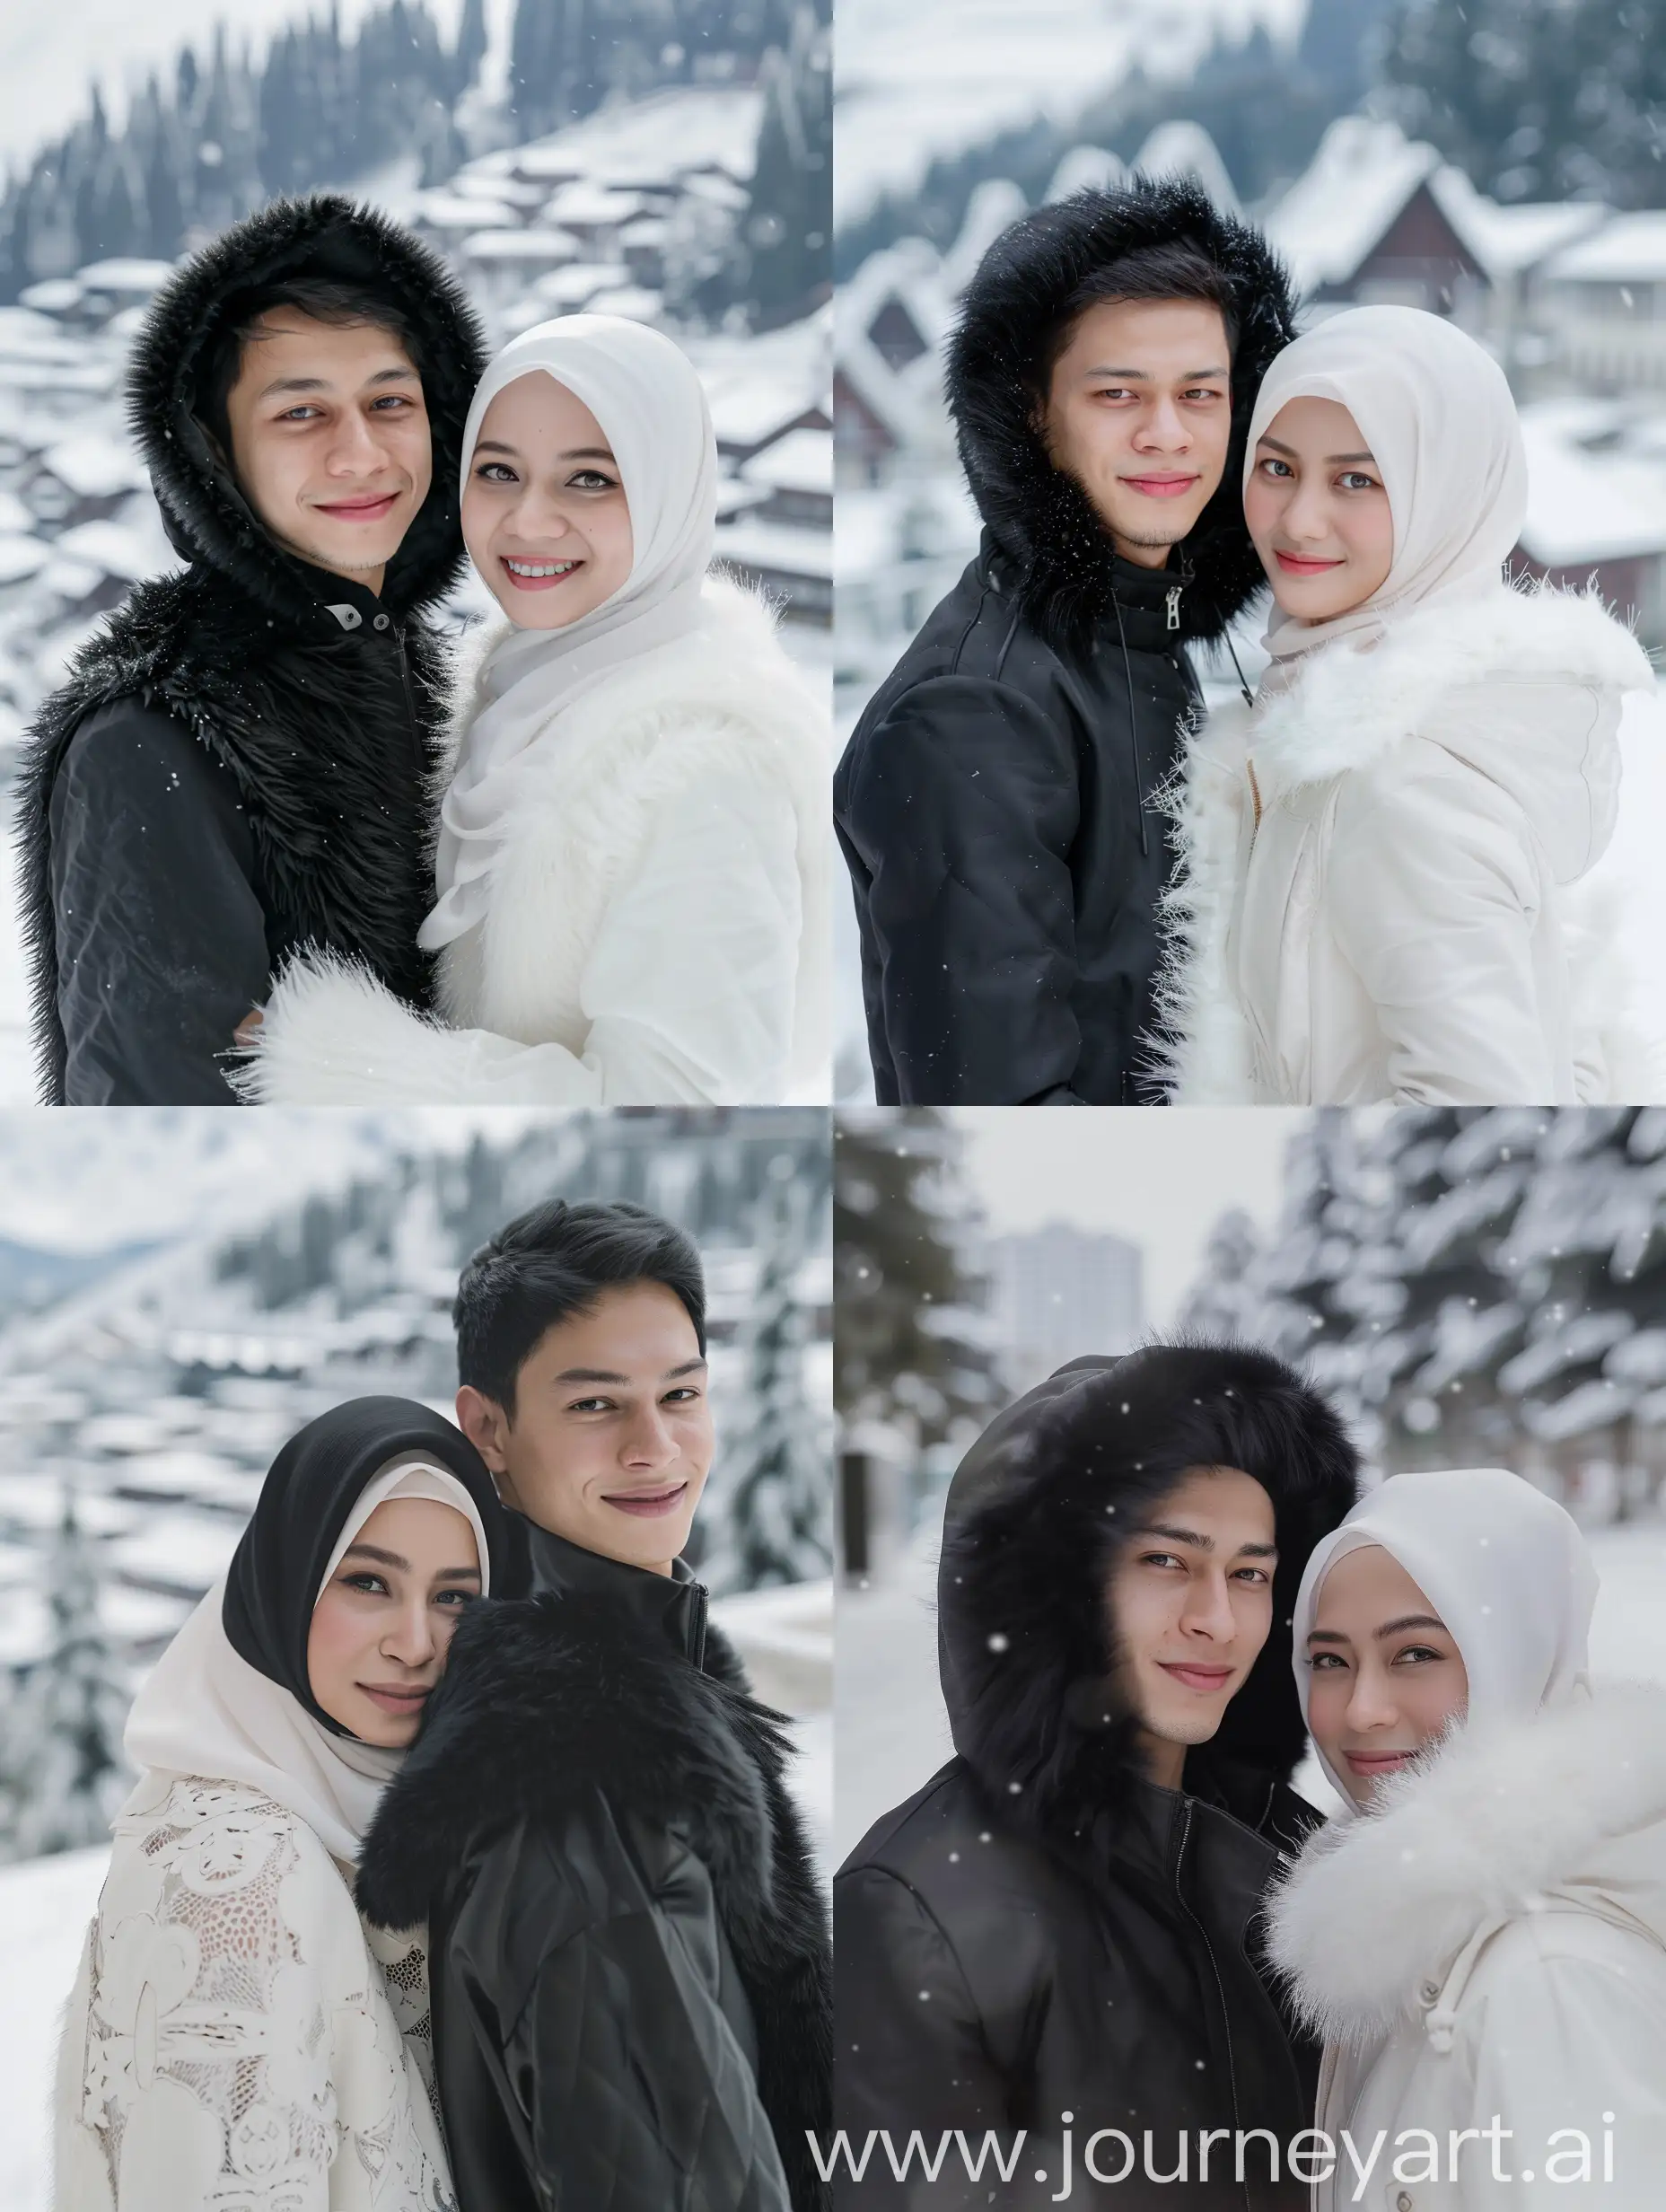 (8K, RAW Photo, Photography, Photorealistic, Realistic, Highest Quality, Intricate Details), Medium photo of 25 year old Indonesian man, fit, ideal body, oval face, white skin, natural skin, medium hair, wearing a cool black fur jacket, side by side with a 25 year old Indonesian woman wearing a white hijab, white jacket with cool fur, they smile facing the camera, their eyes look at the camera, the corners of their eyes are parallel to the beautiful view in the snow city.